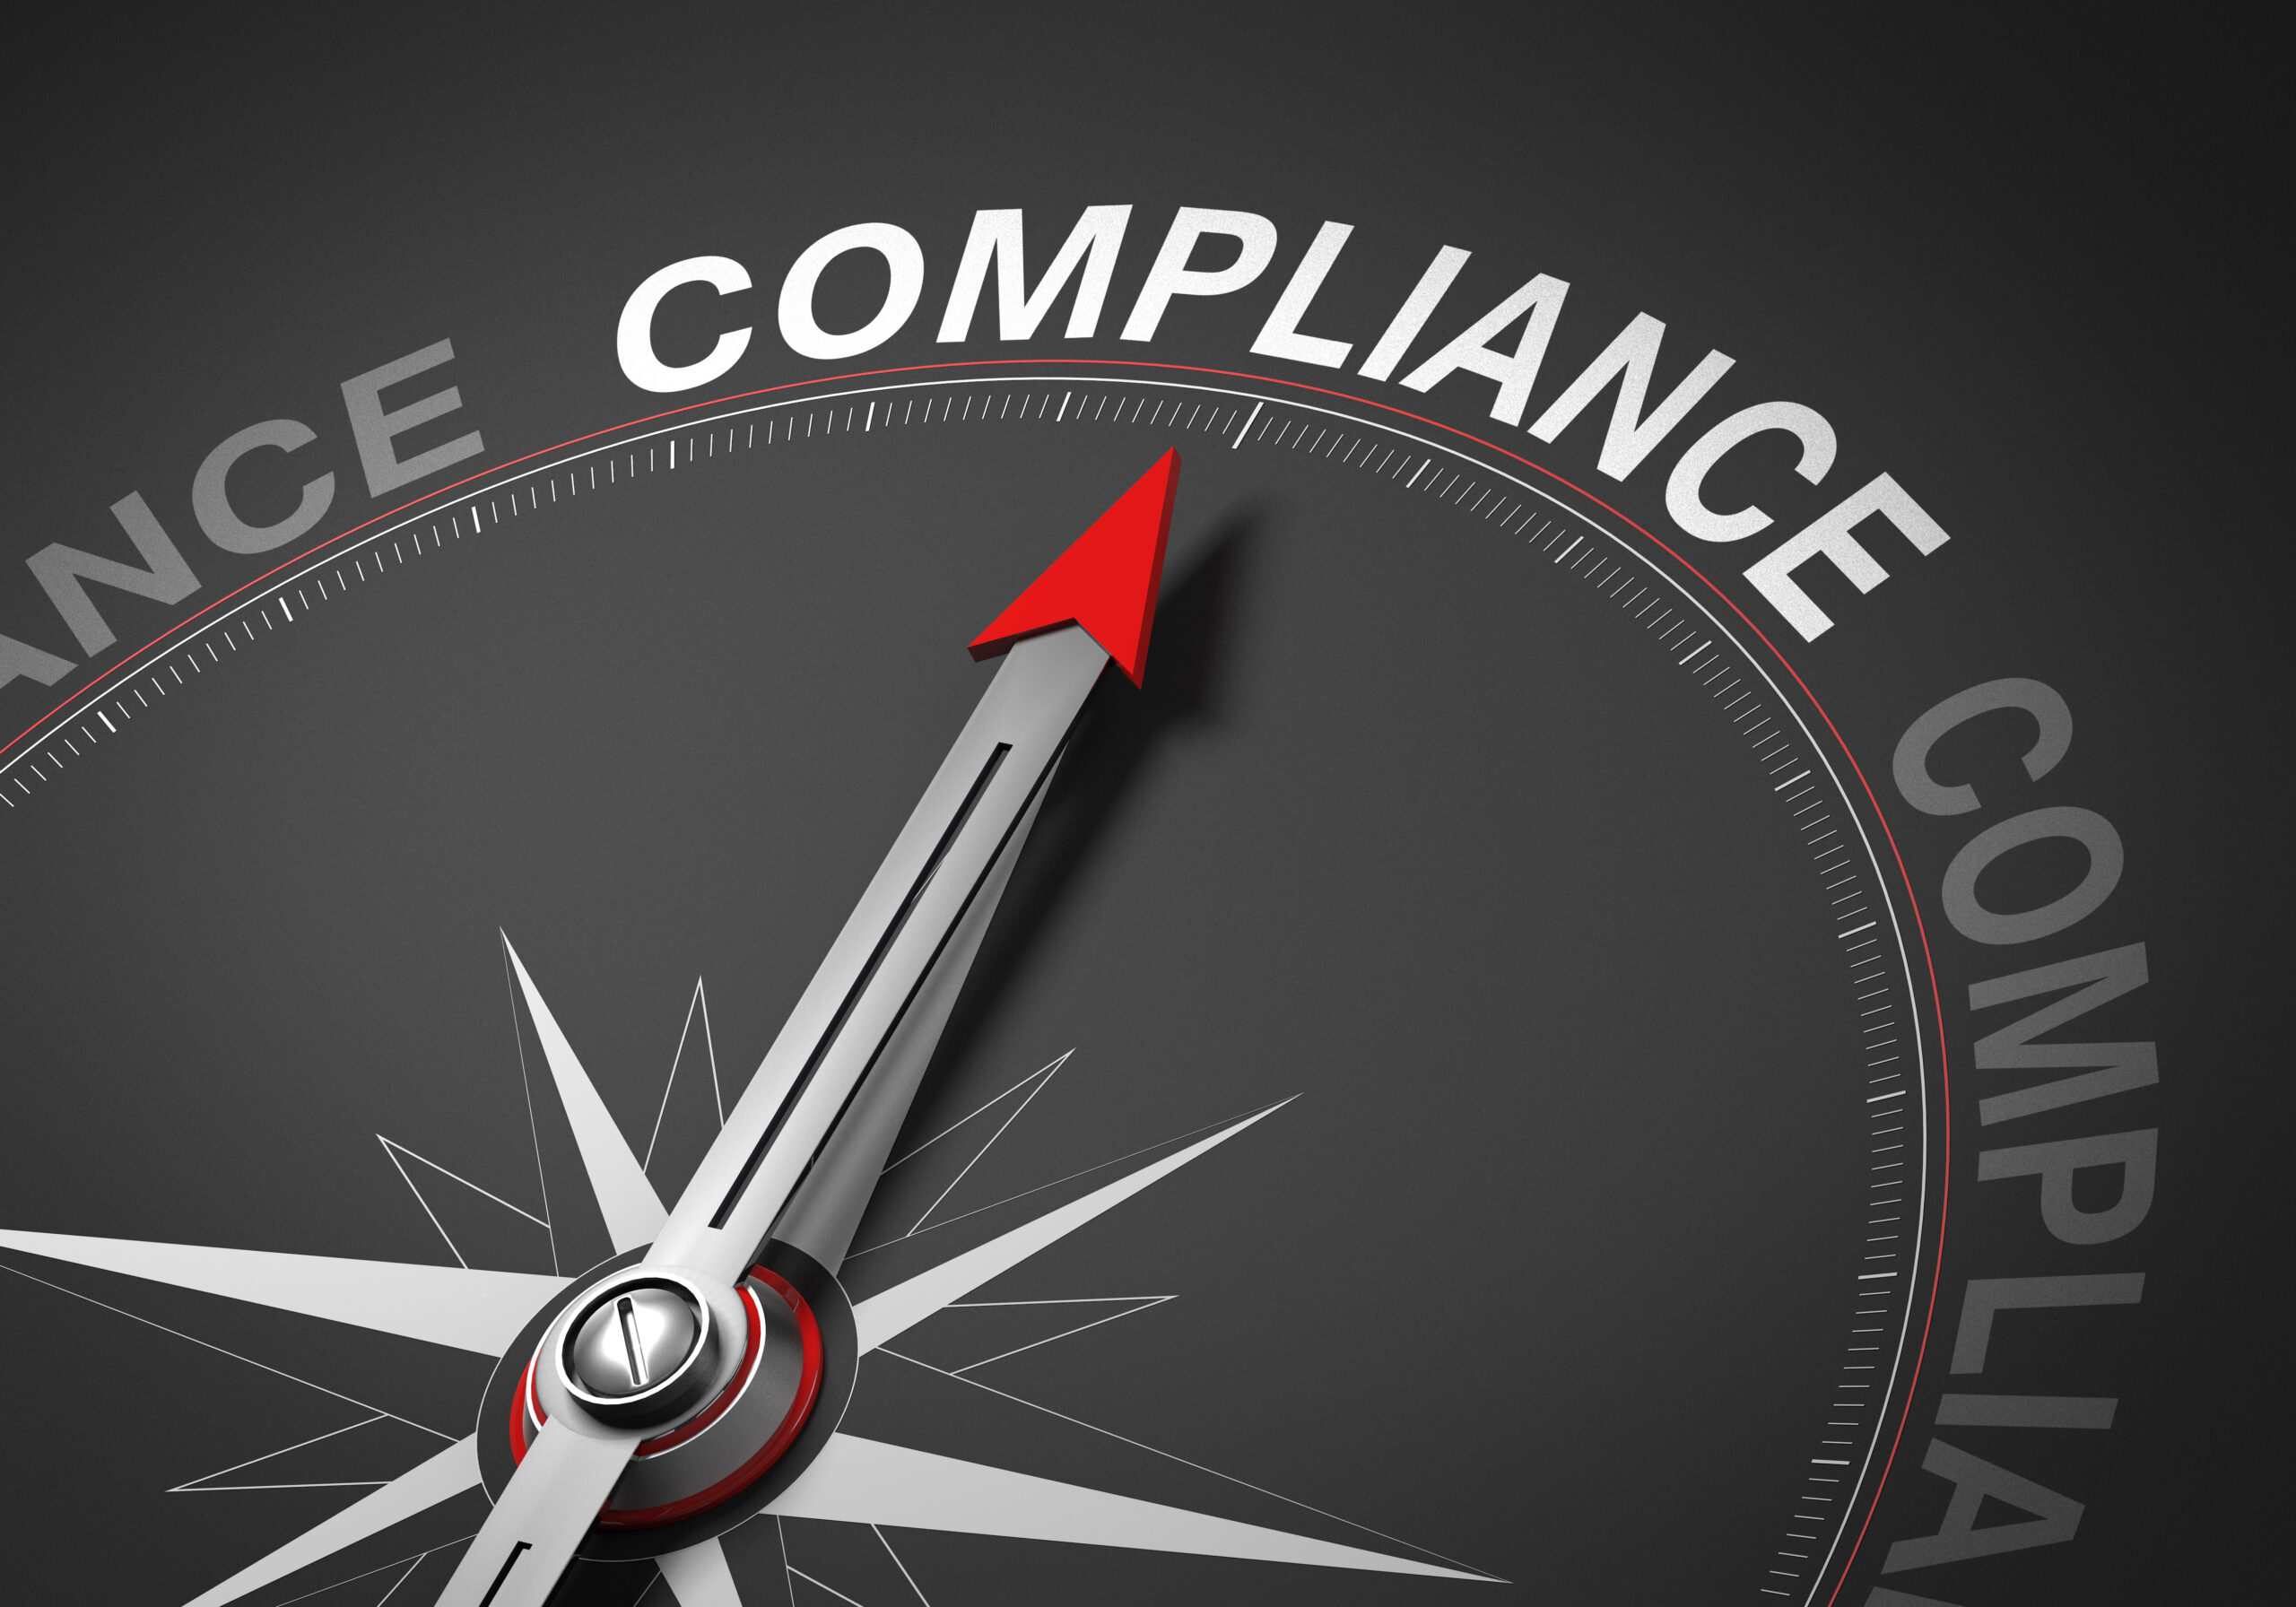 Compass pointing to "Compliance"